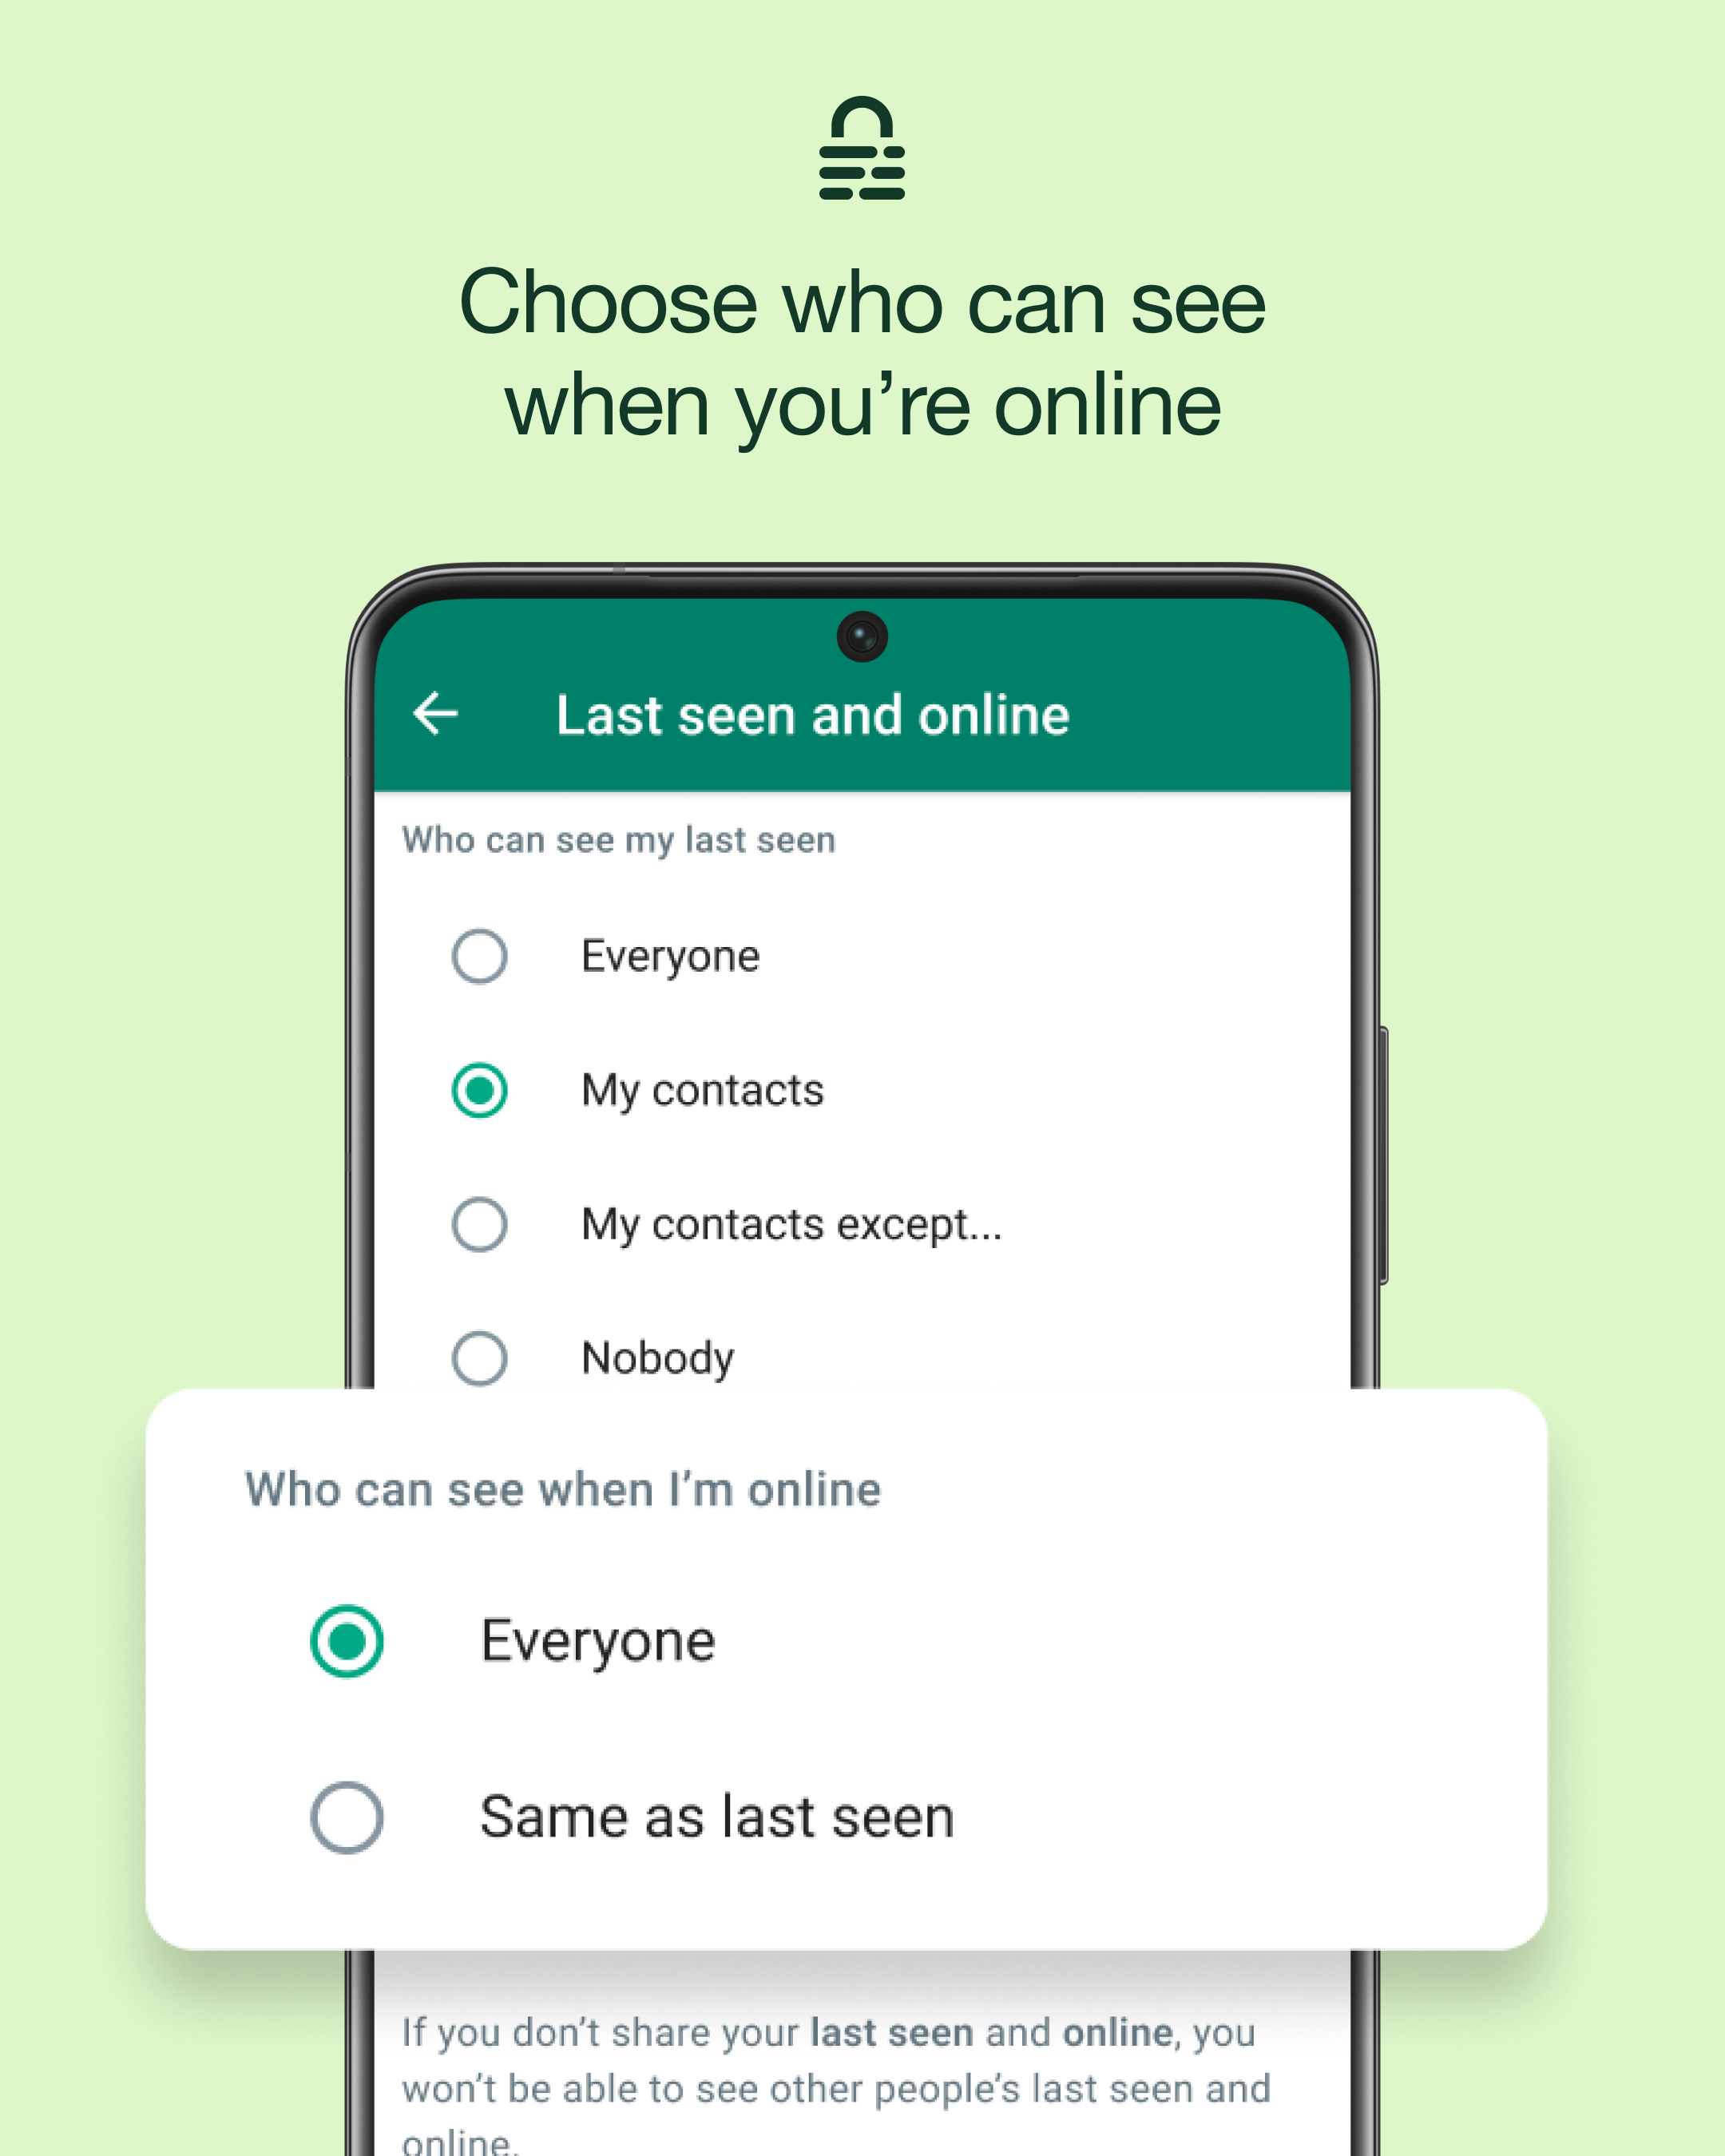 The WhatsApp interface showing a prompt asking who can see when you're online.